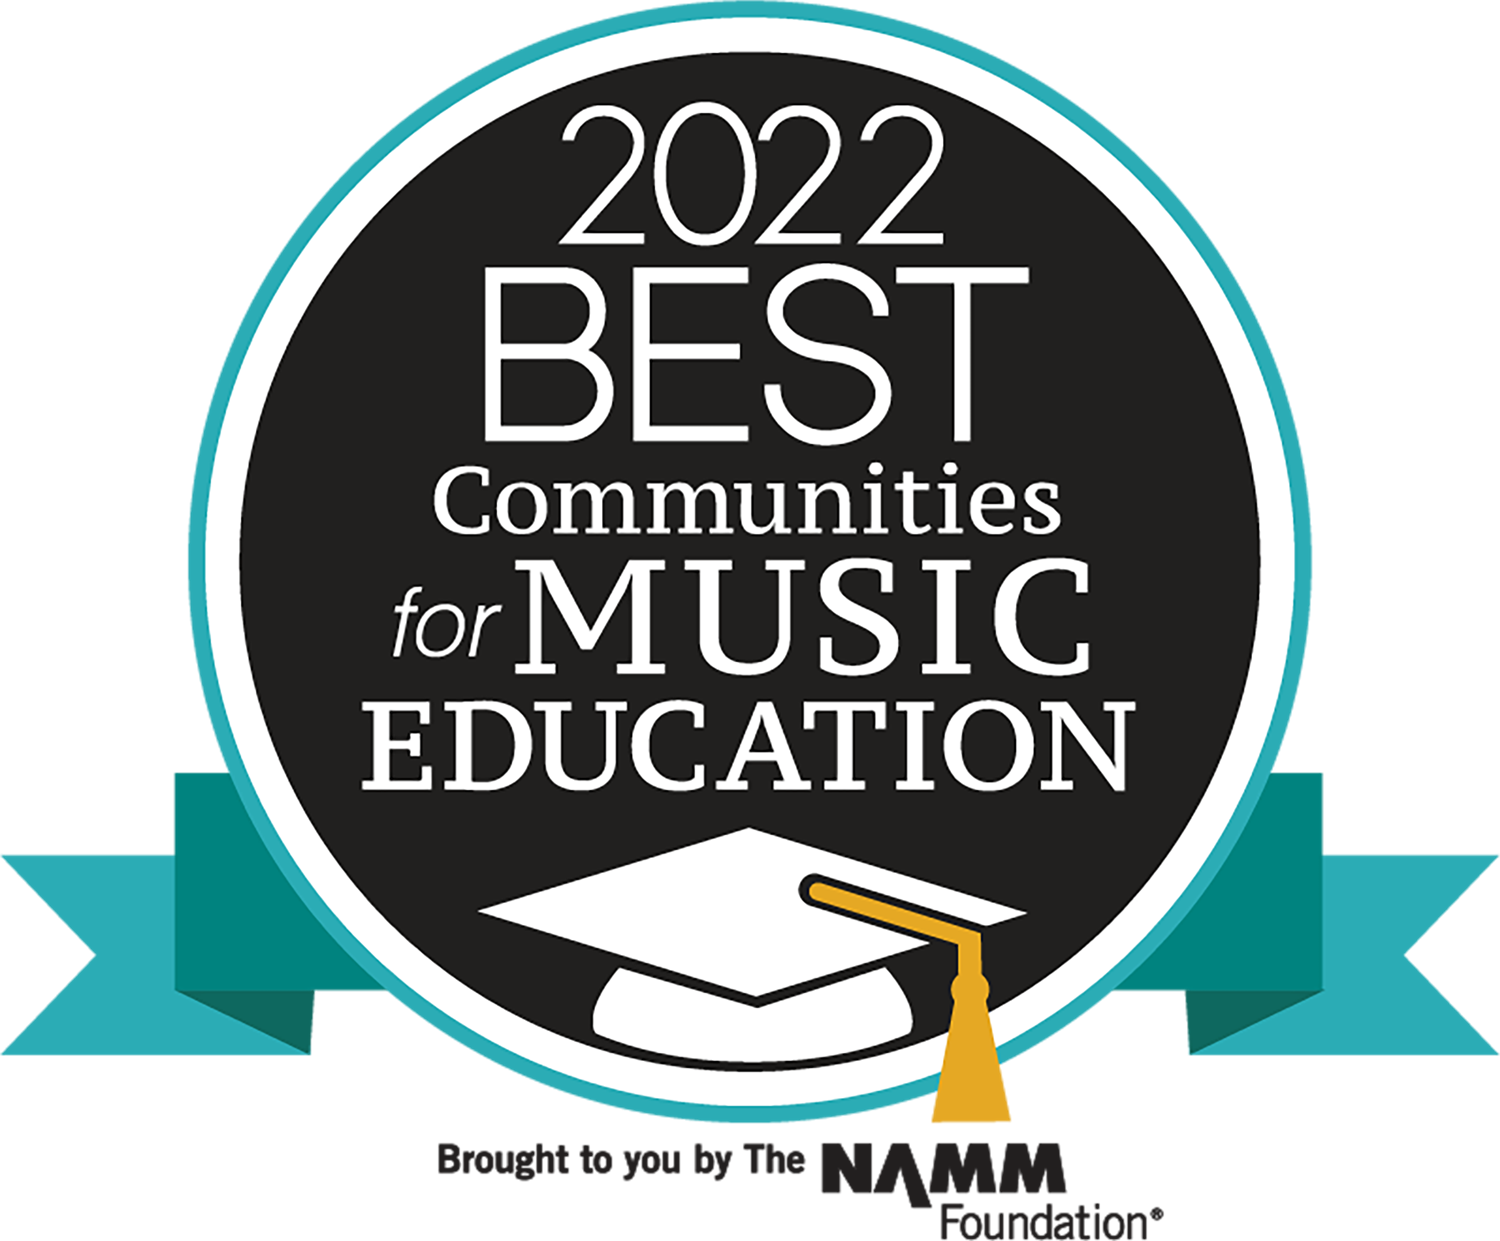 CCSD’s Music Education Program Receives National Recognition for 10th Consecutive Year